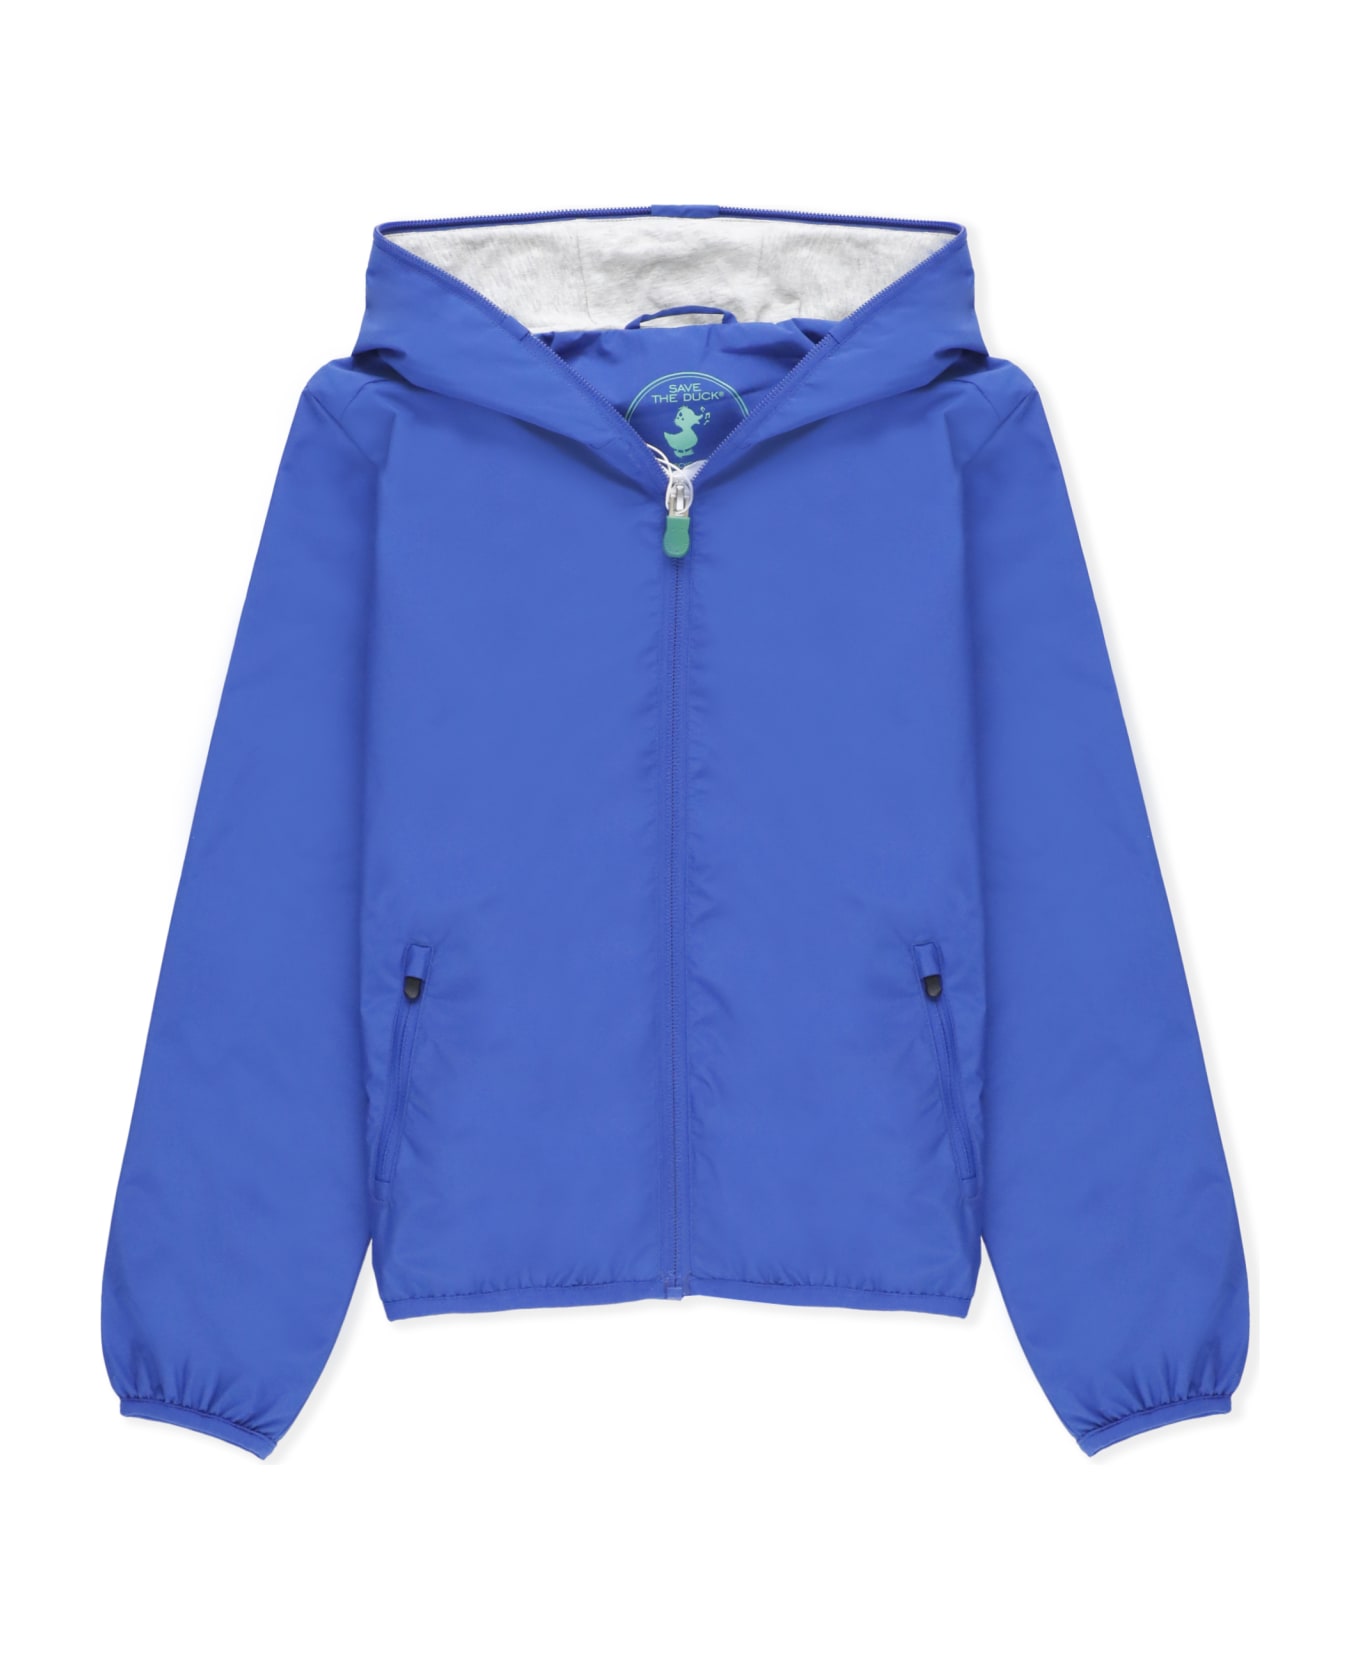 Save the Duck Jules Jacket - Blue